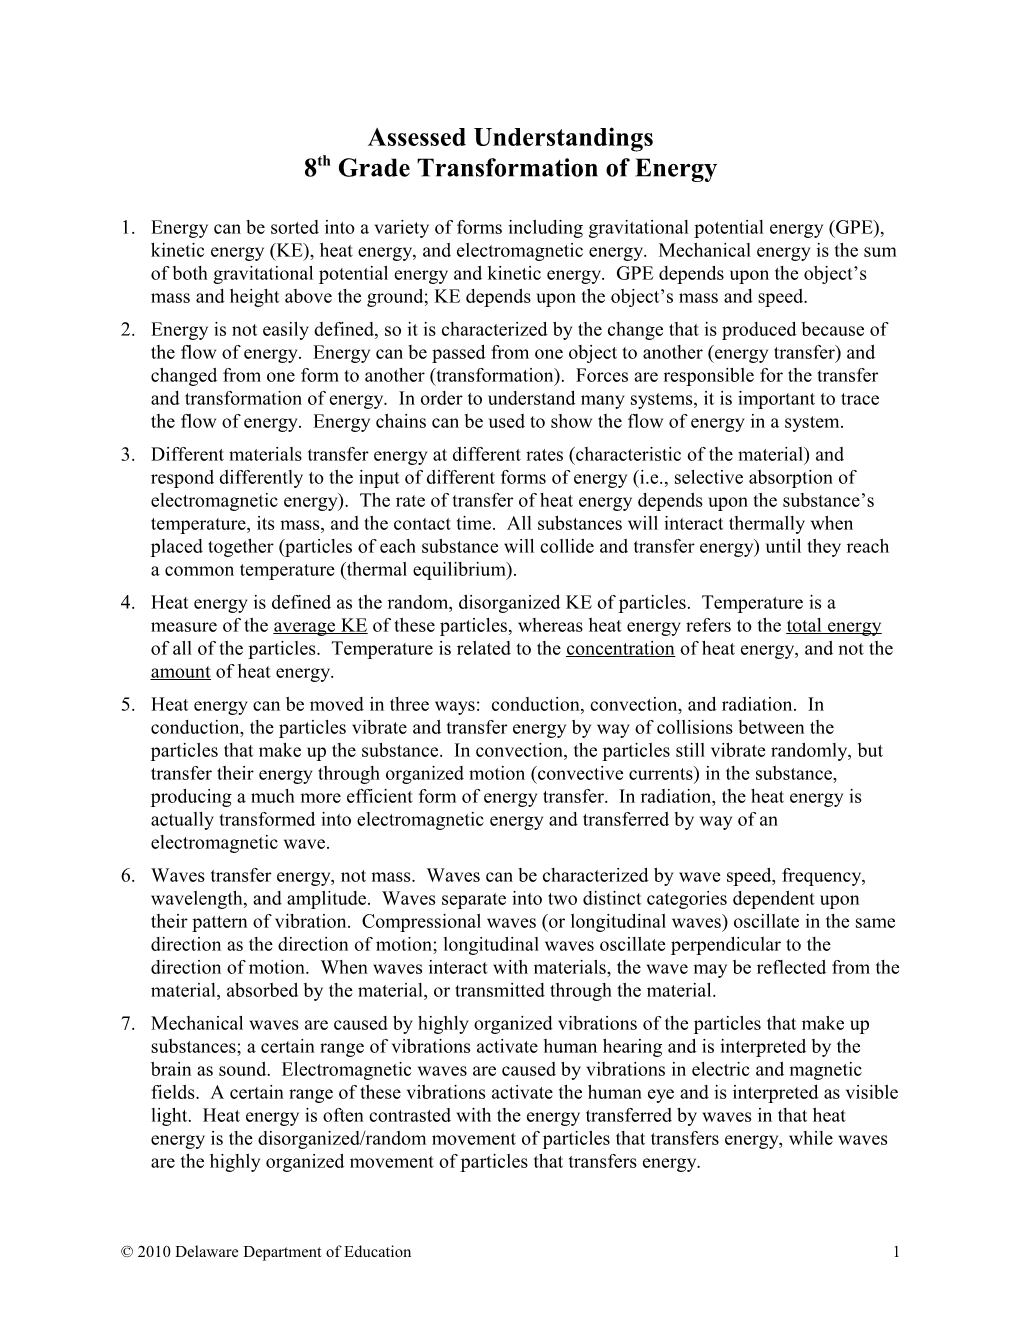 Transformation of Energy Assessment